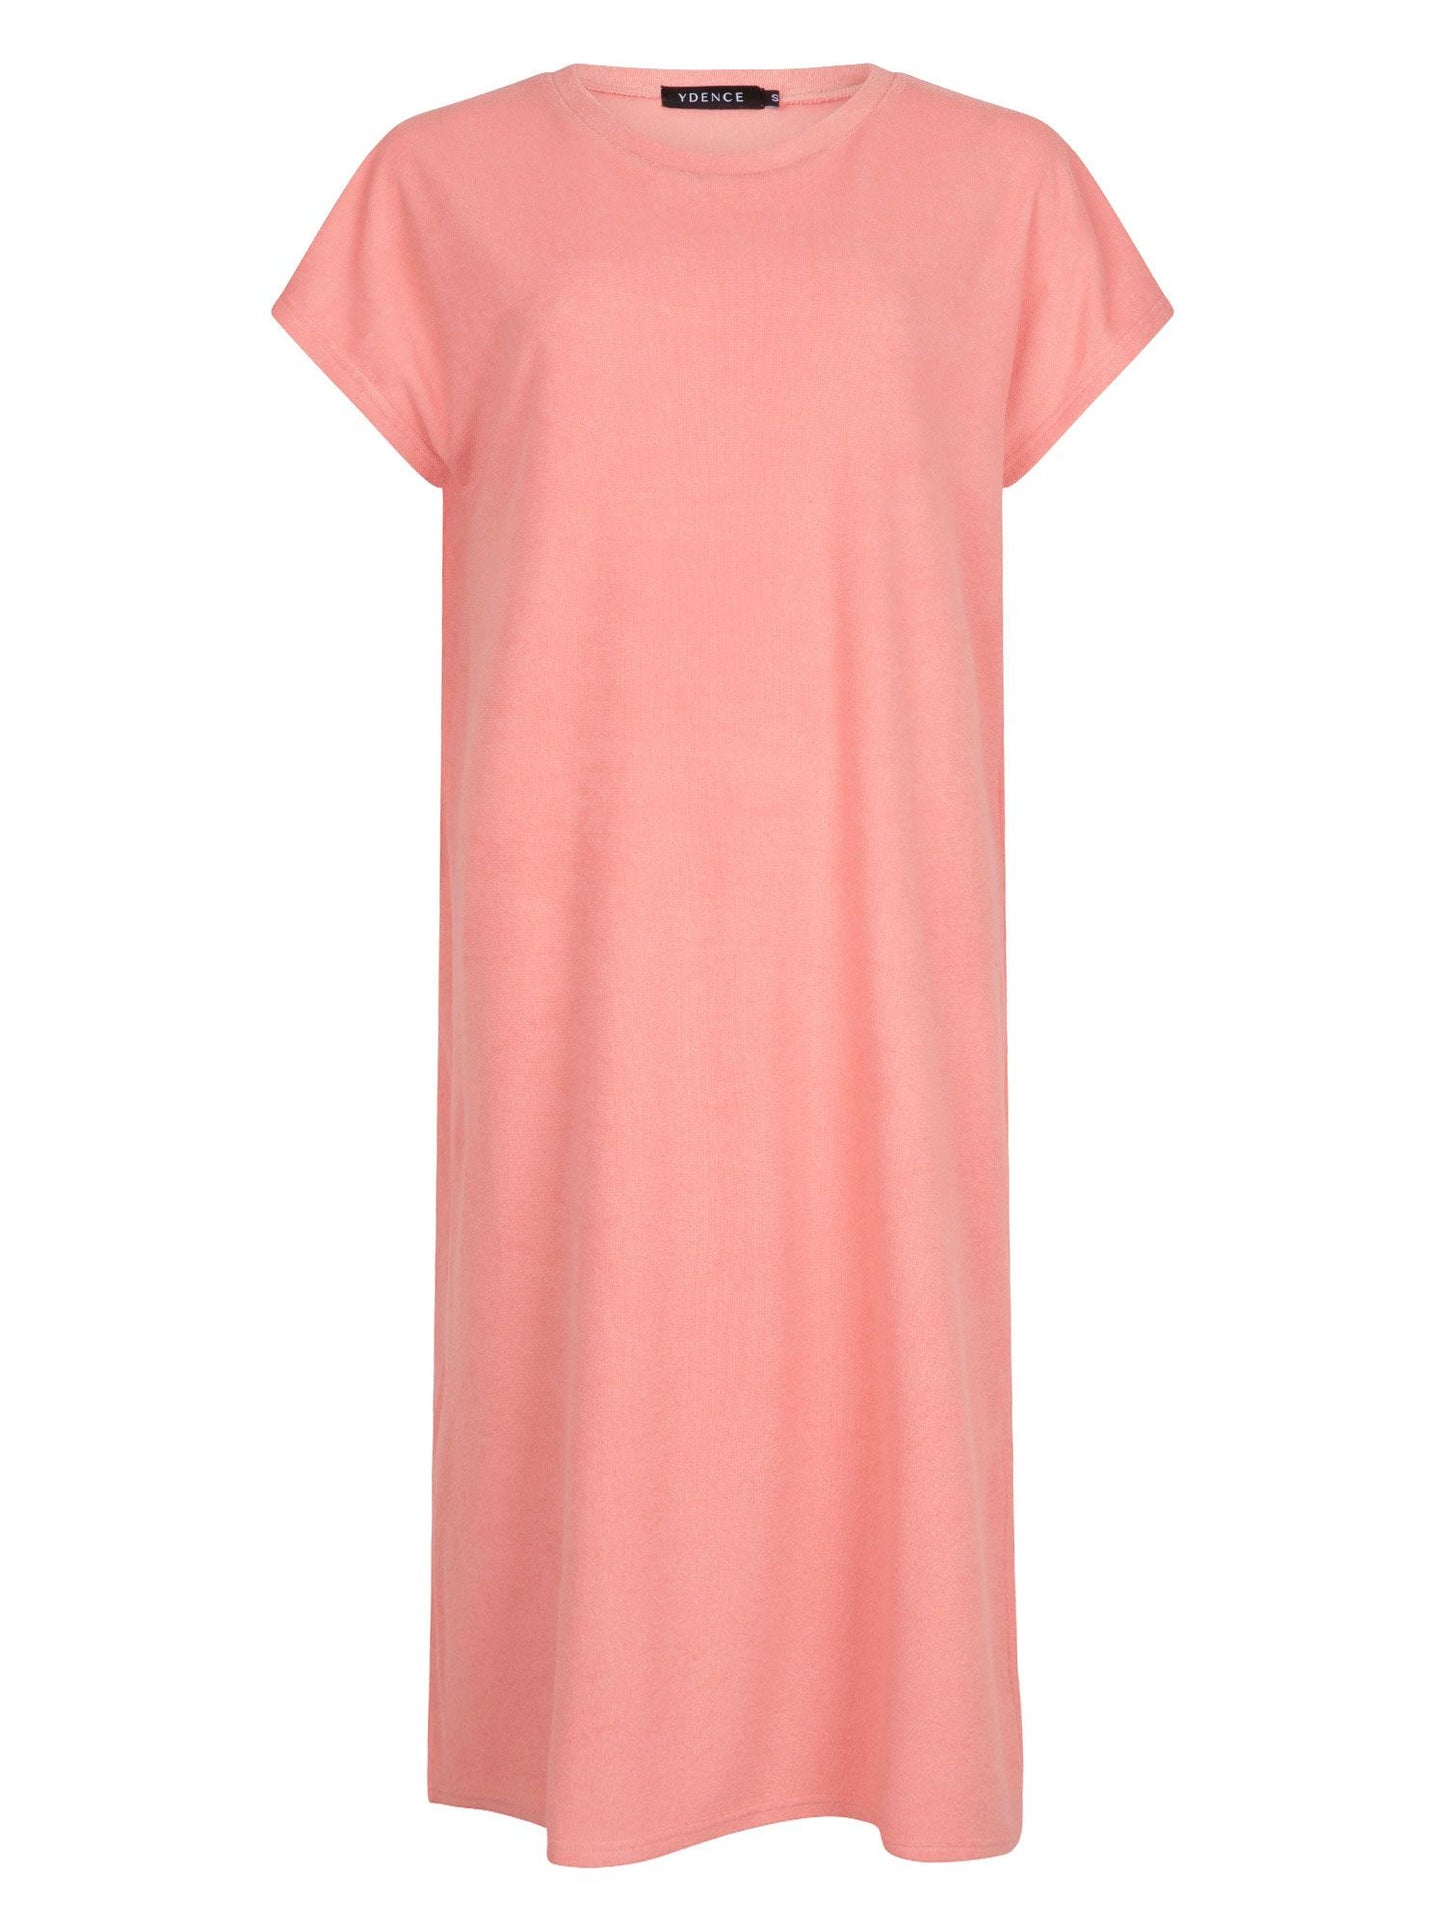 Dress Lyo -Ydence in Turqouise of Coral Pink